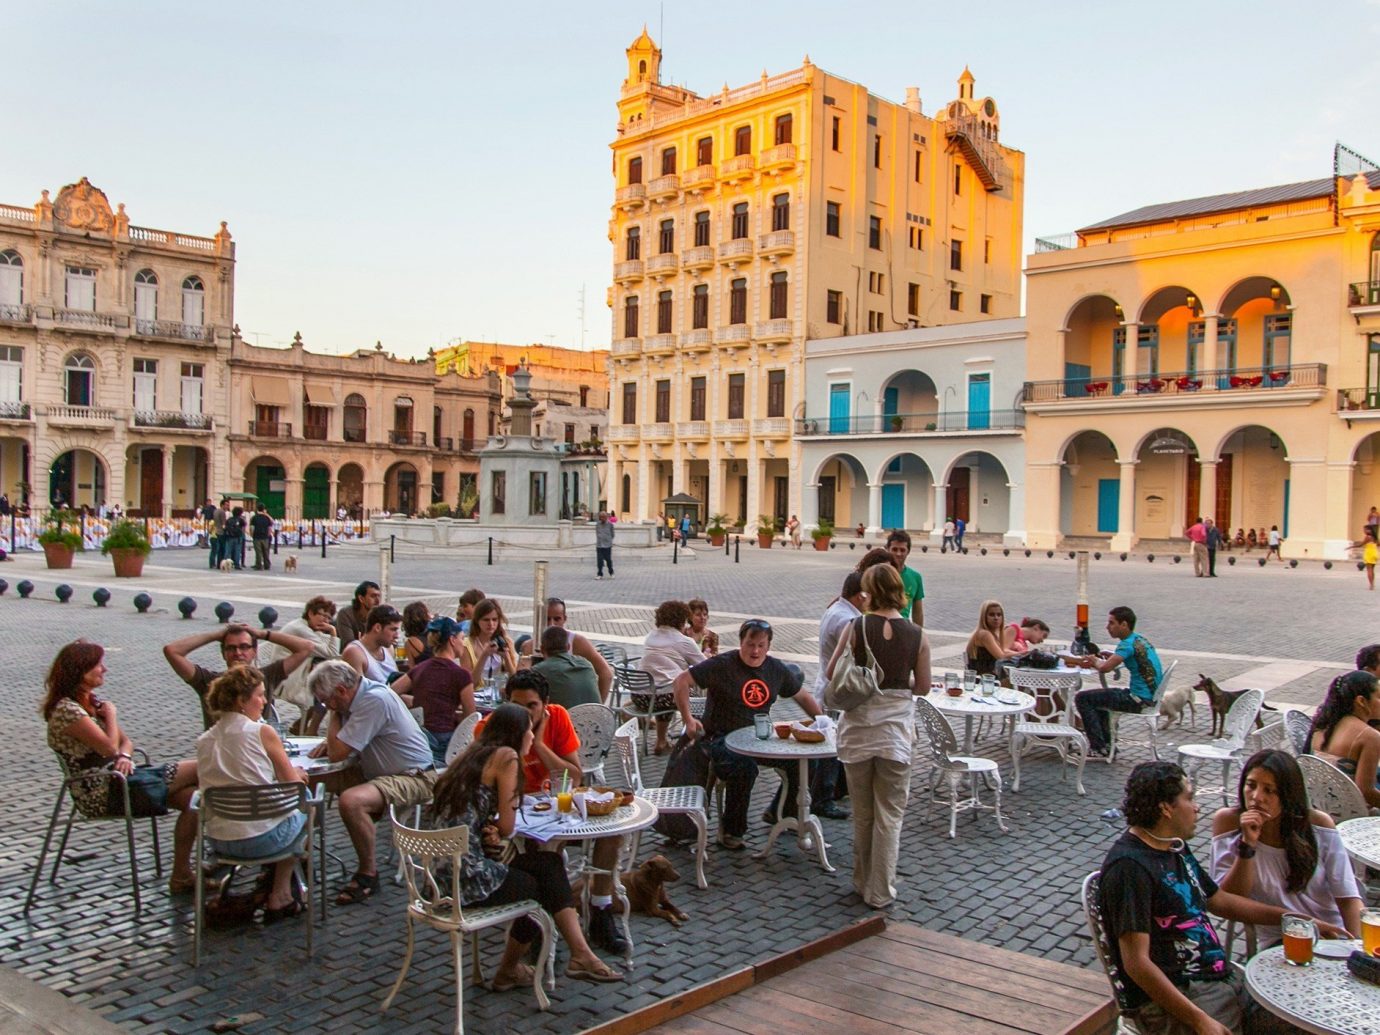 Jetsetter Guides building outdoor sky person plaza Town group landmark people tourism palace town square human settlement vacation ancient rome ancient history tours travel crowd